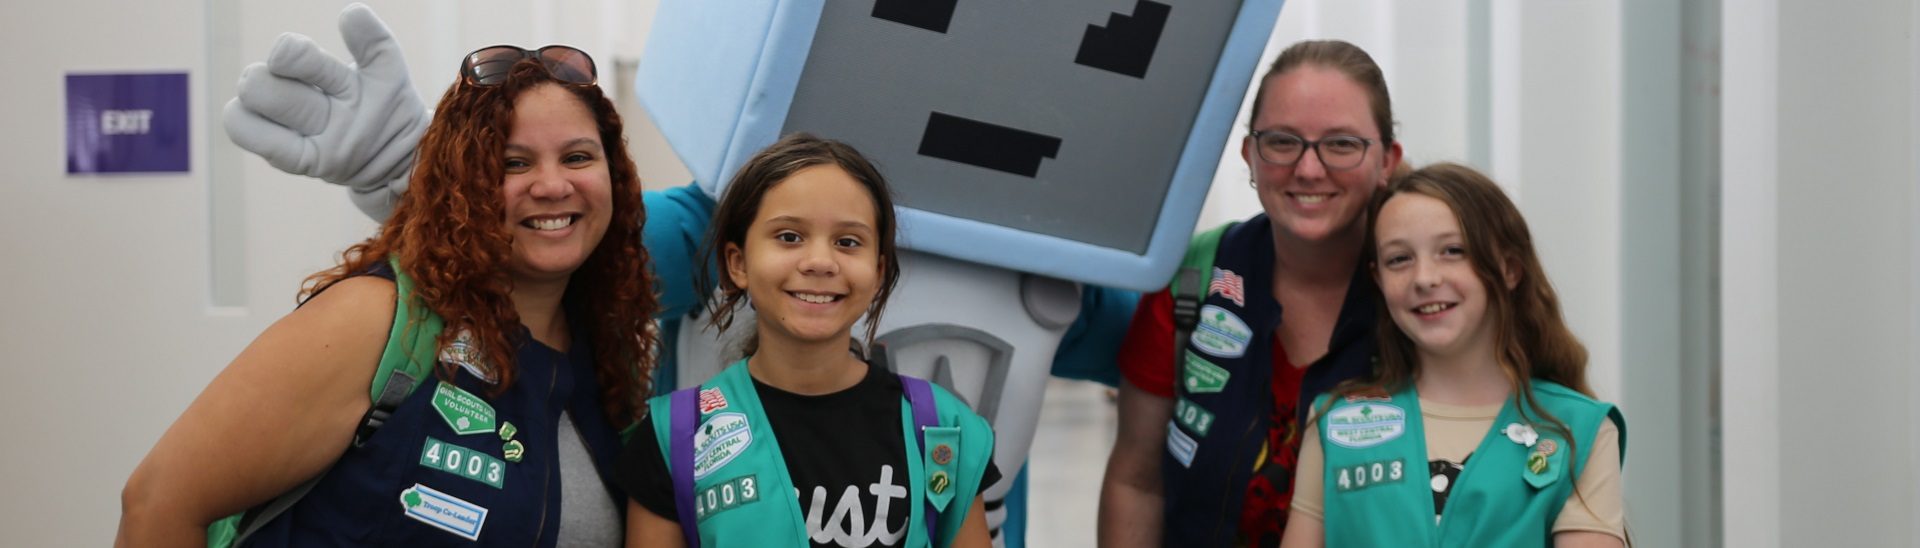  two girl scout juniors outside wearing junior vest uniform smiling and hugging 